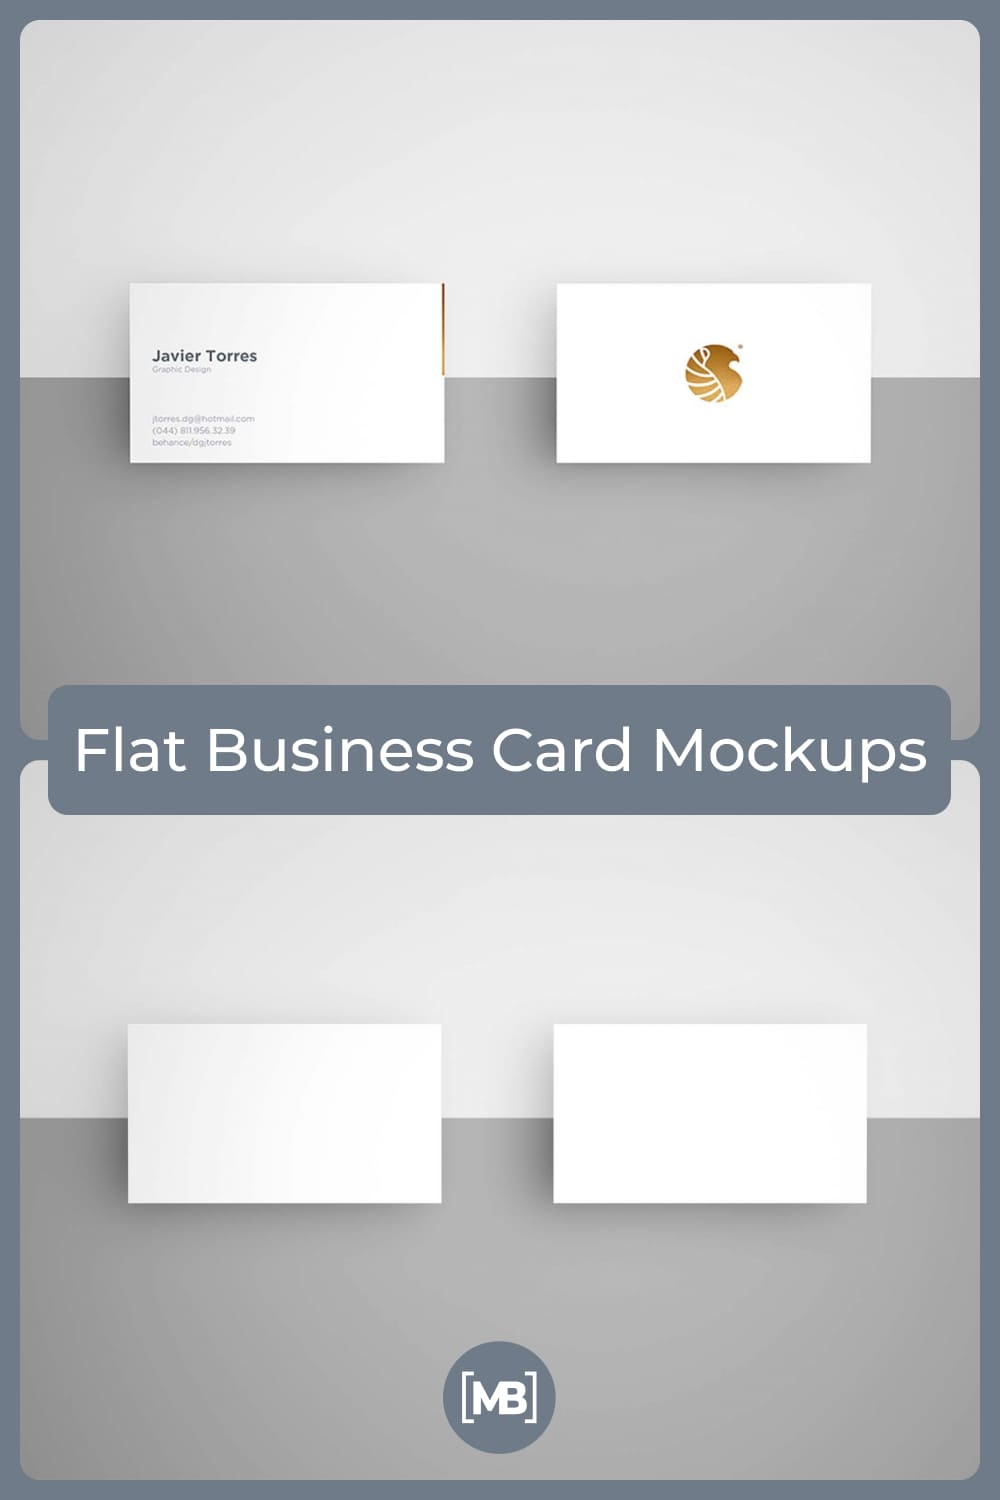 These are light white business cards with a gold logo.